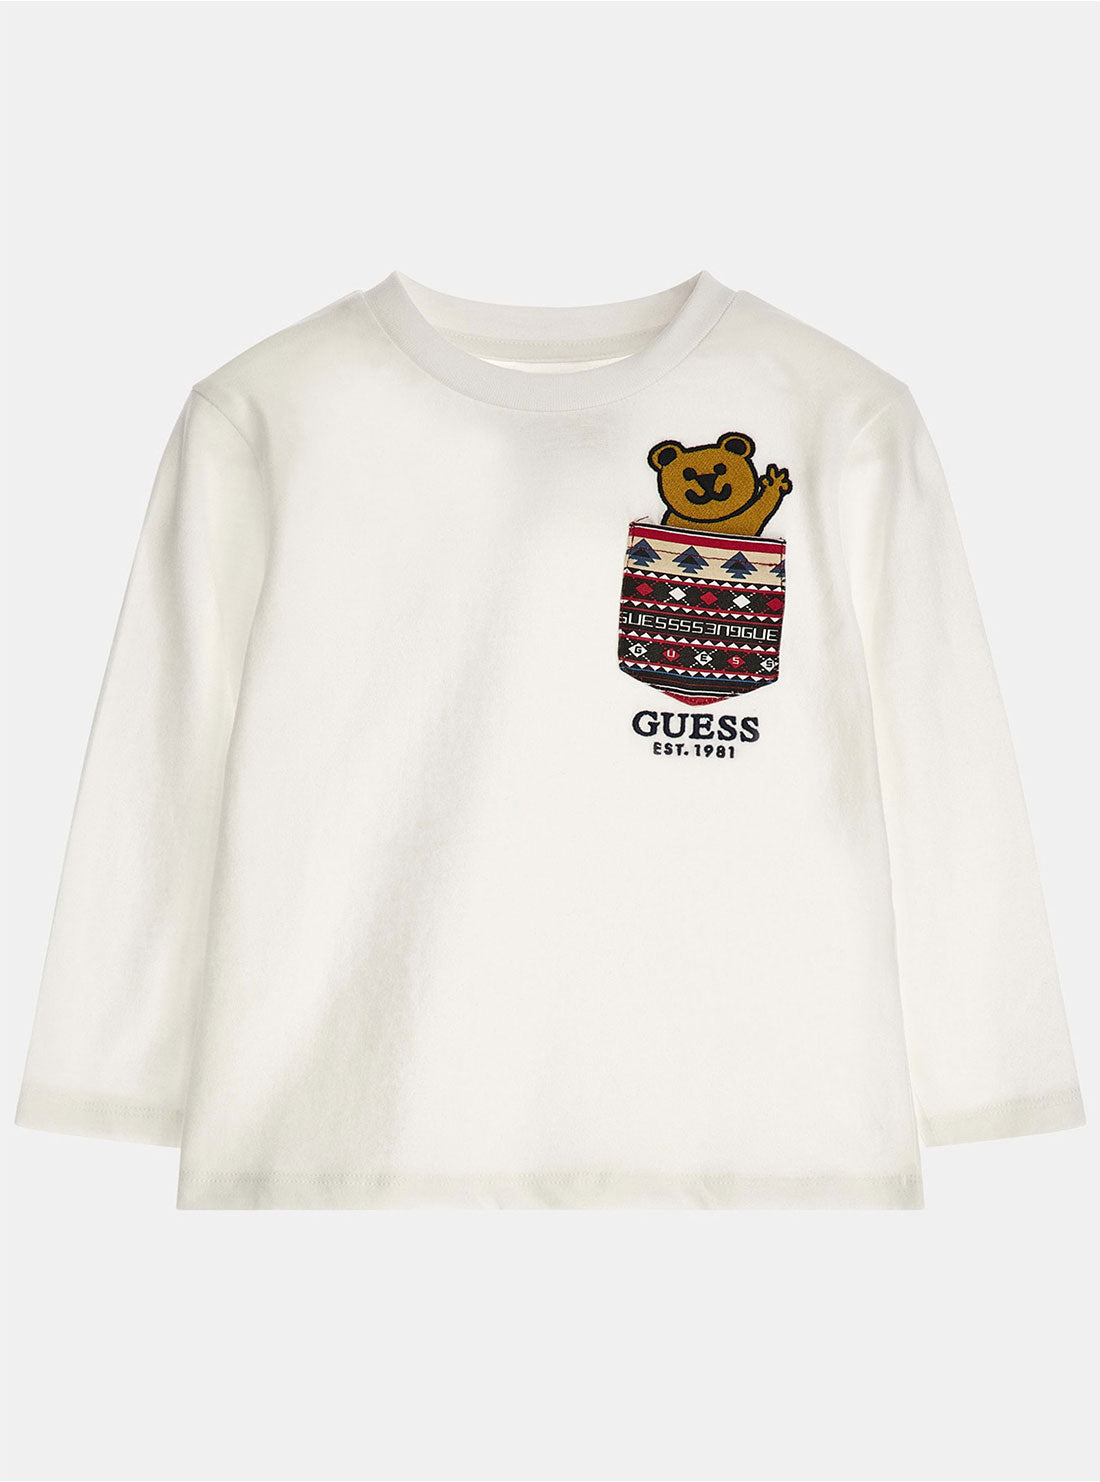 GUESS White Bear Long Sleeve T-Shirt (2-7) front view